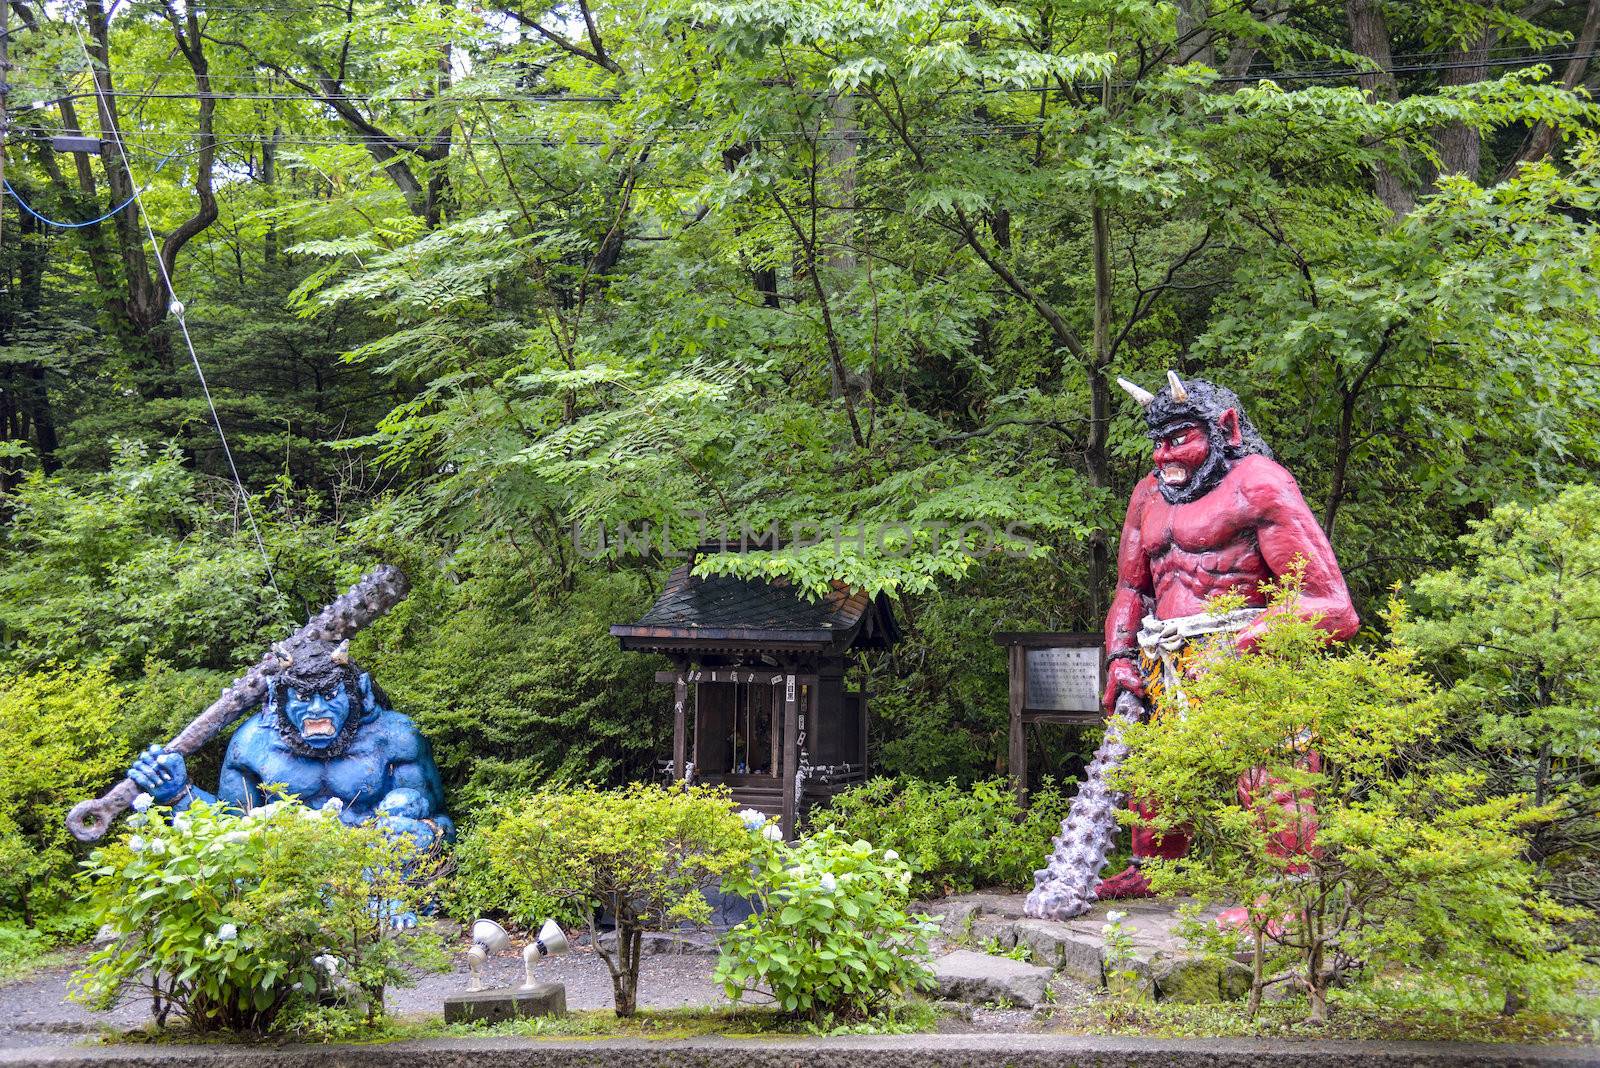 Two Giants stand  near the shrine